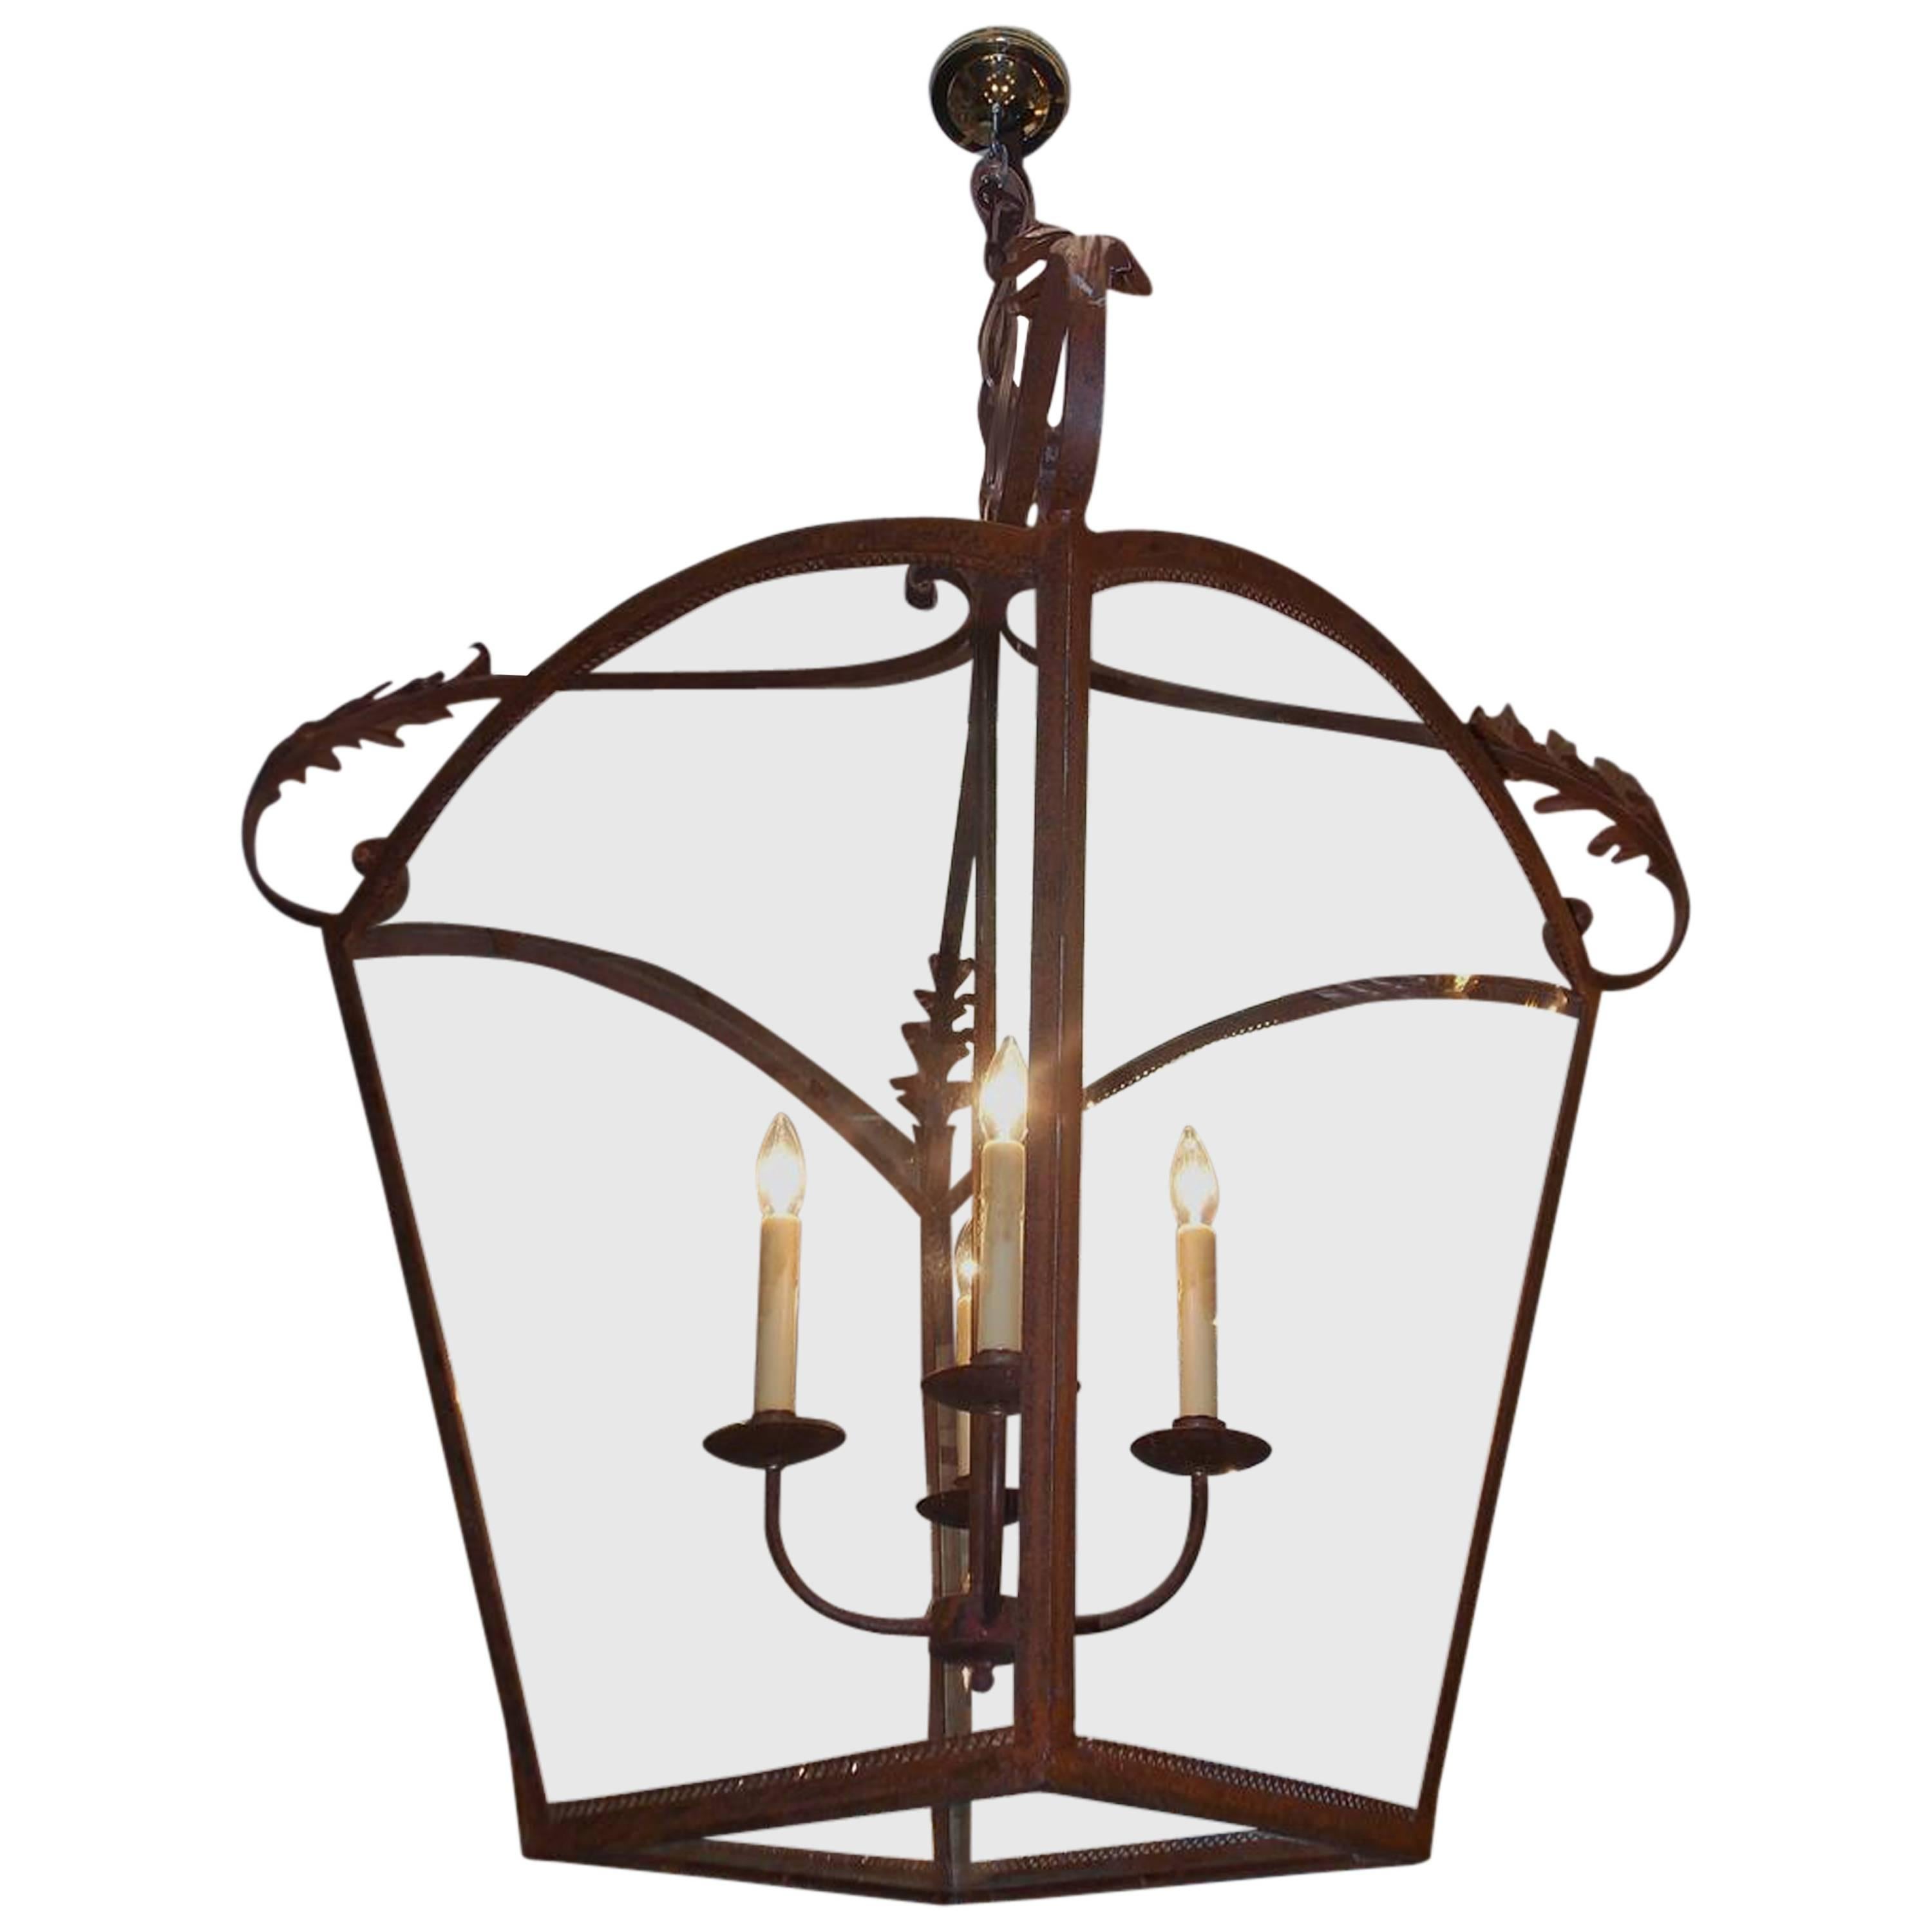 Italian Wrought Iron Arched Dome Hanging Glass Lantern , Circa 1870